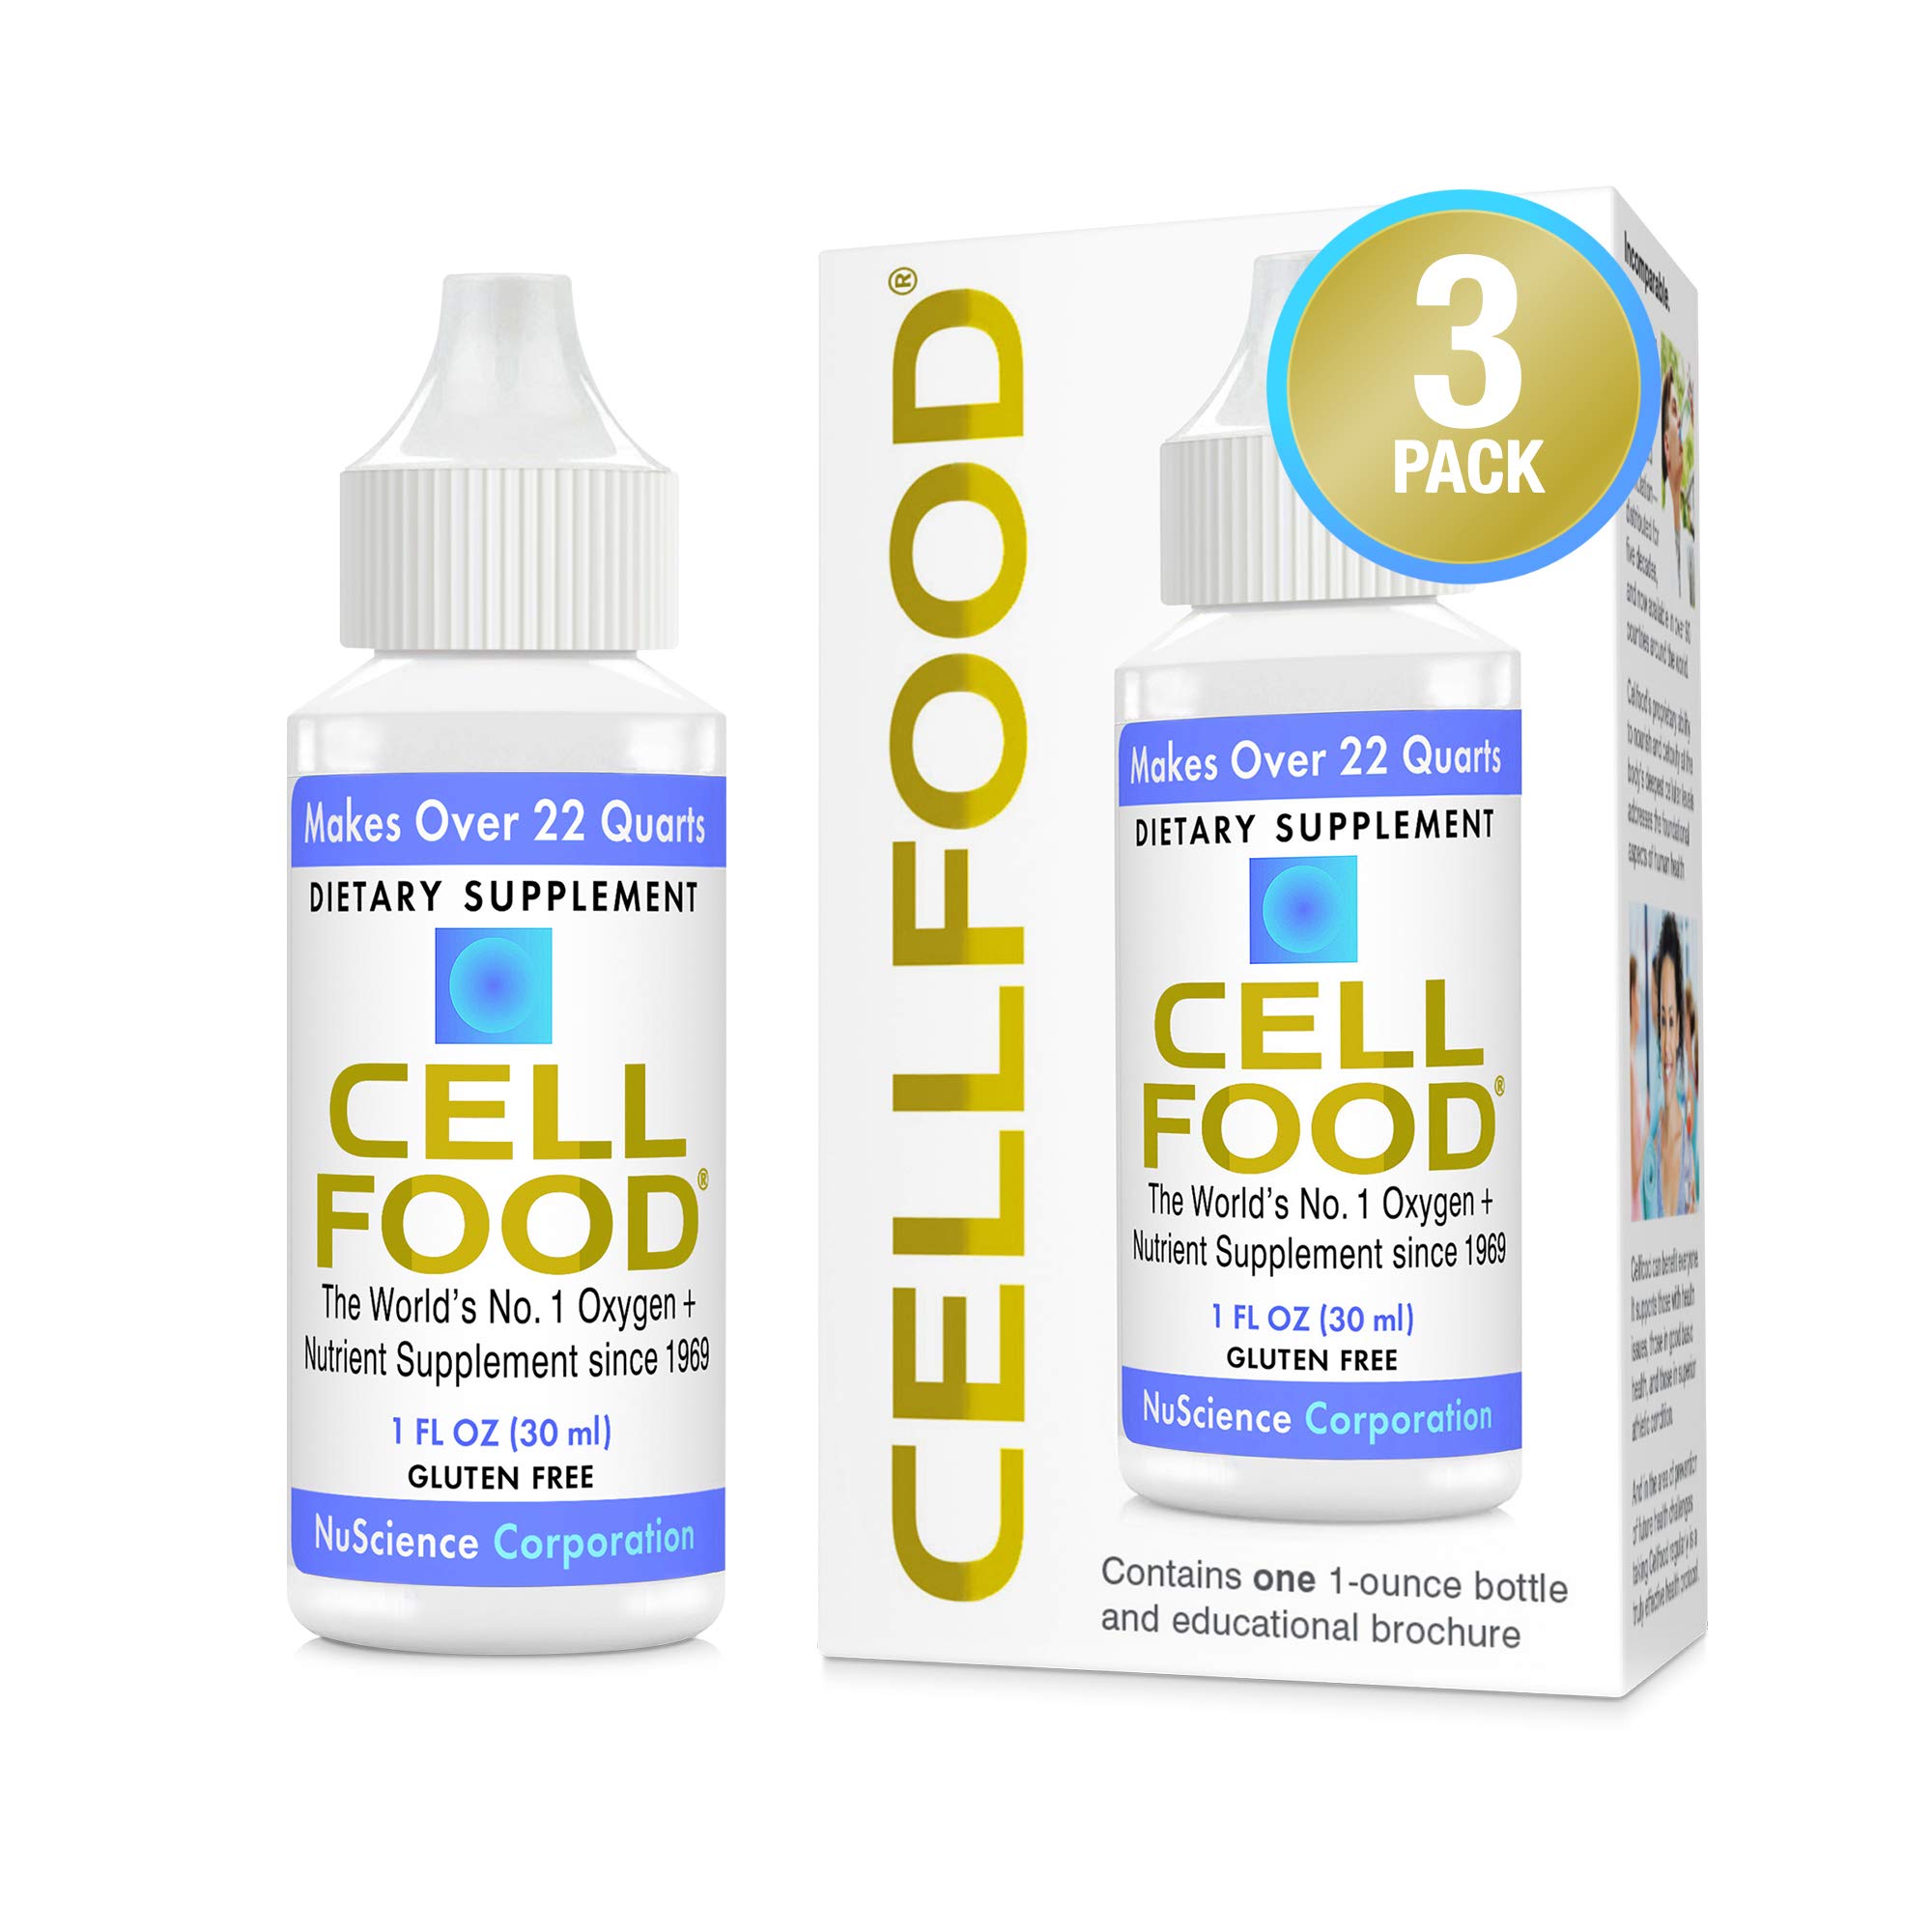 Cellfood Liquid Concentrate - 1 fl oz, 3 Pack - Oxygen + Nutrient Supplement - Supports Immune System, Energy, Endurance, Hydration & Overall Healt...